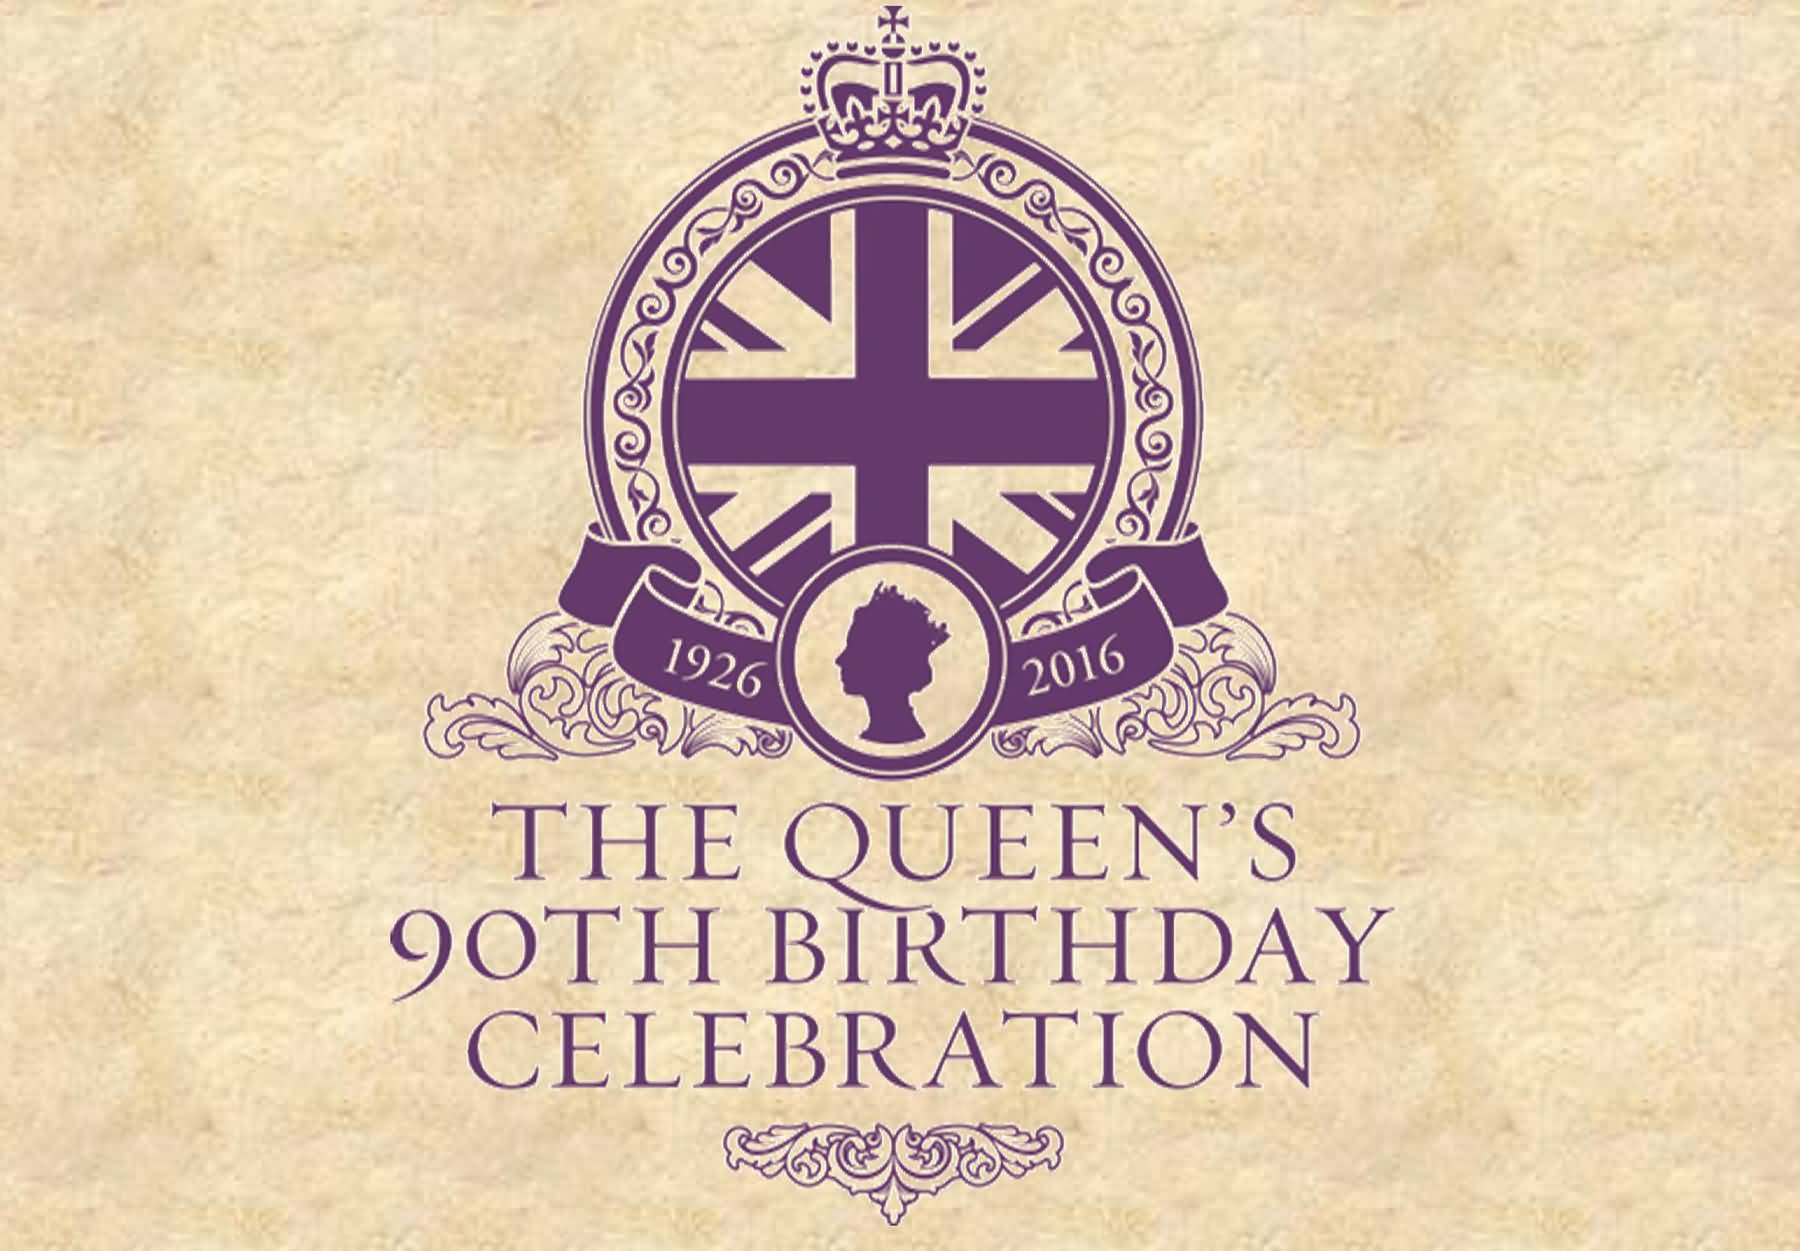 The Queen’s 90th Birthday Celebration Greeting